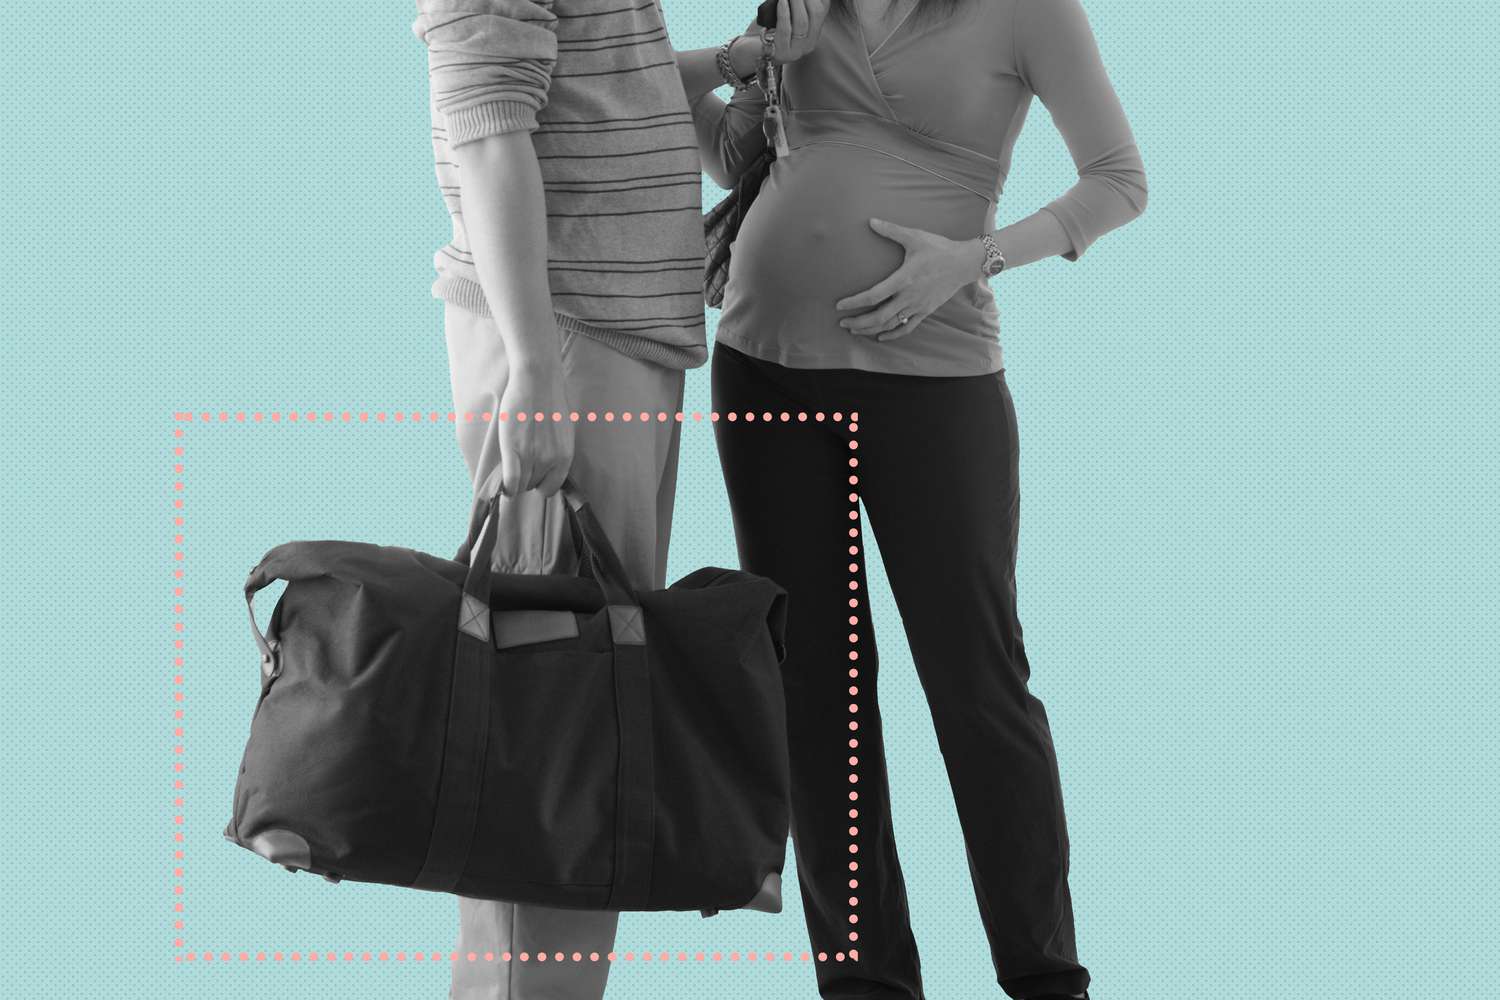 pregnant wife and husband carrying bag